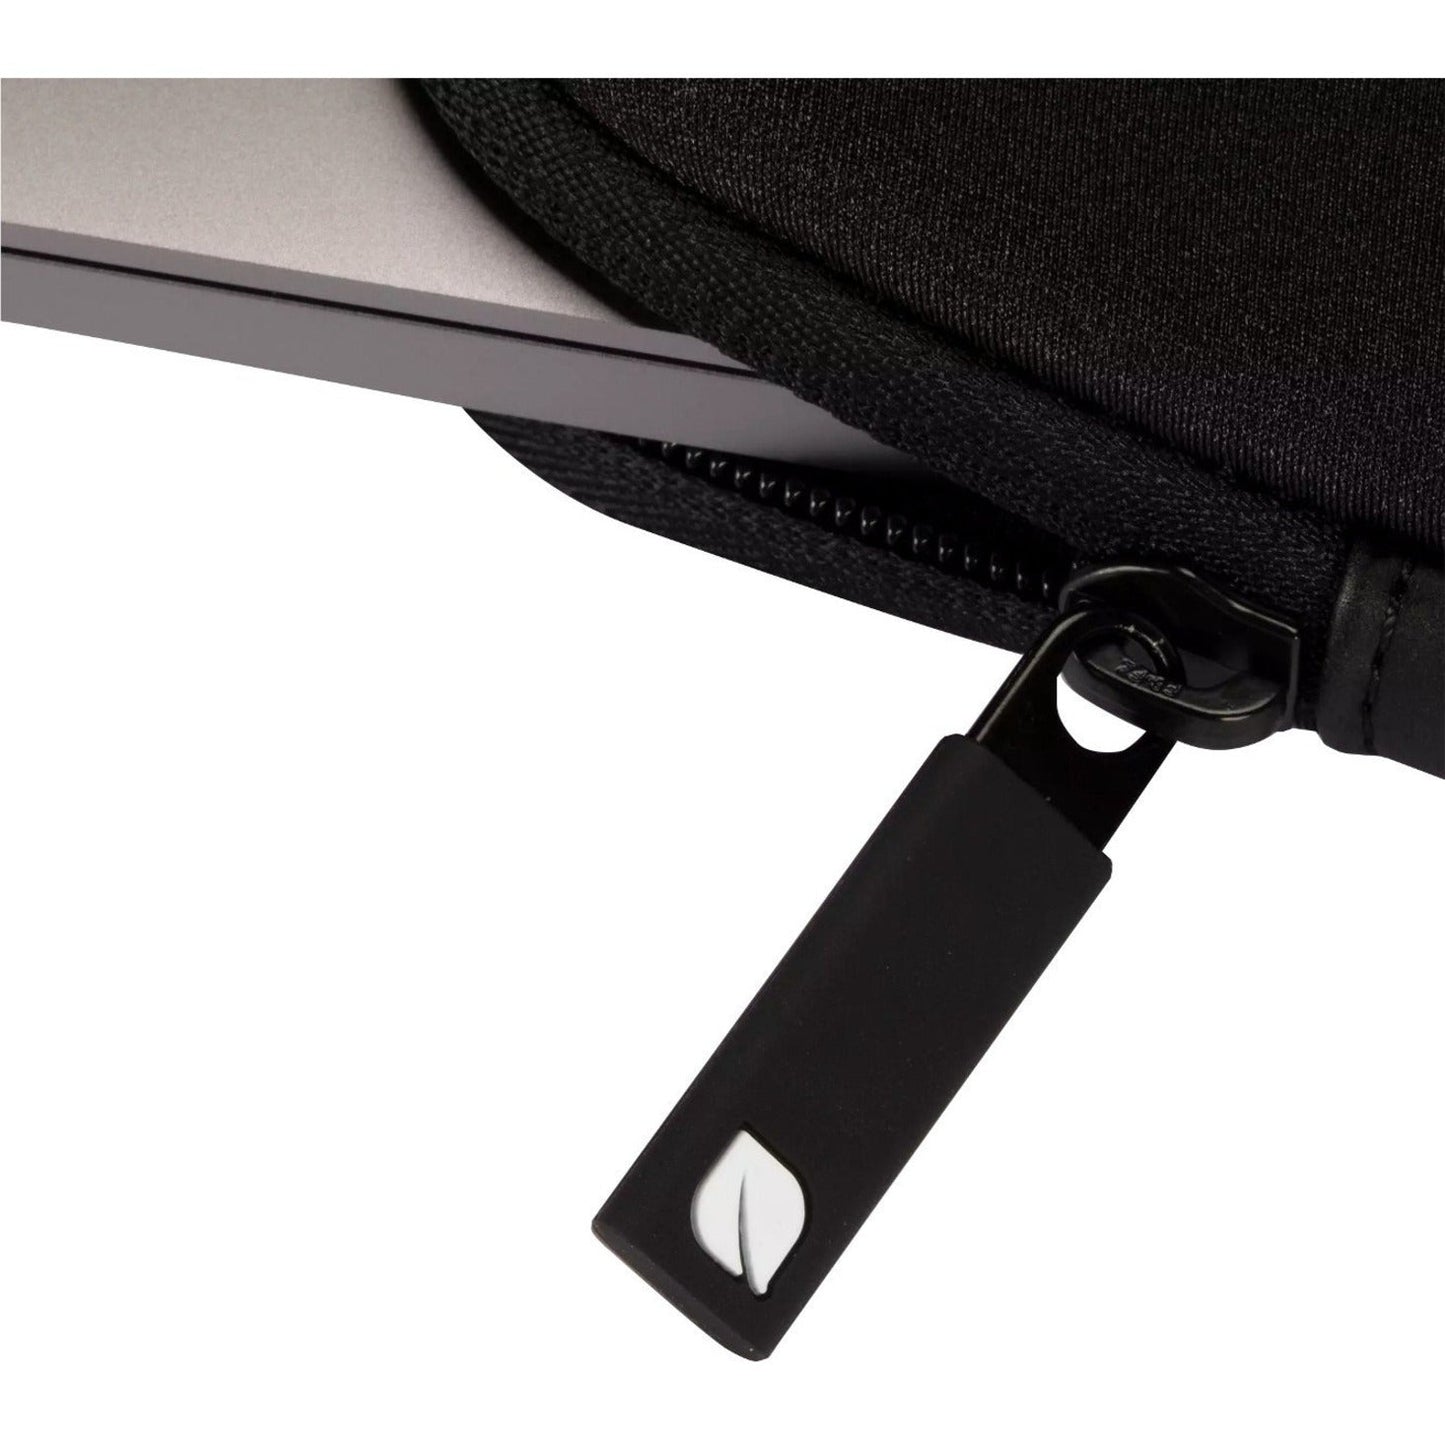 Incase Classic Carrying Case (Sleeve) for 15" to 16" Apple Notebook MacBook - Black